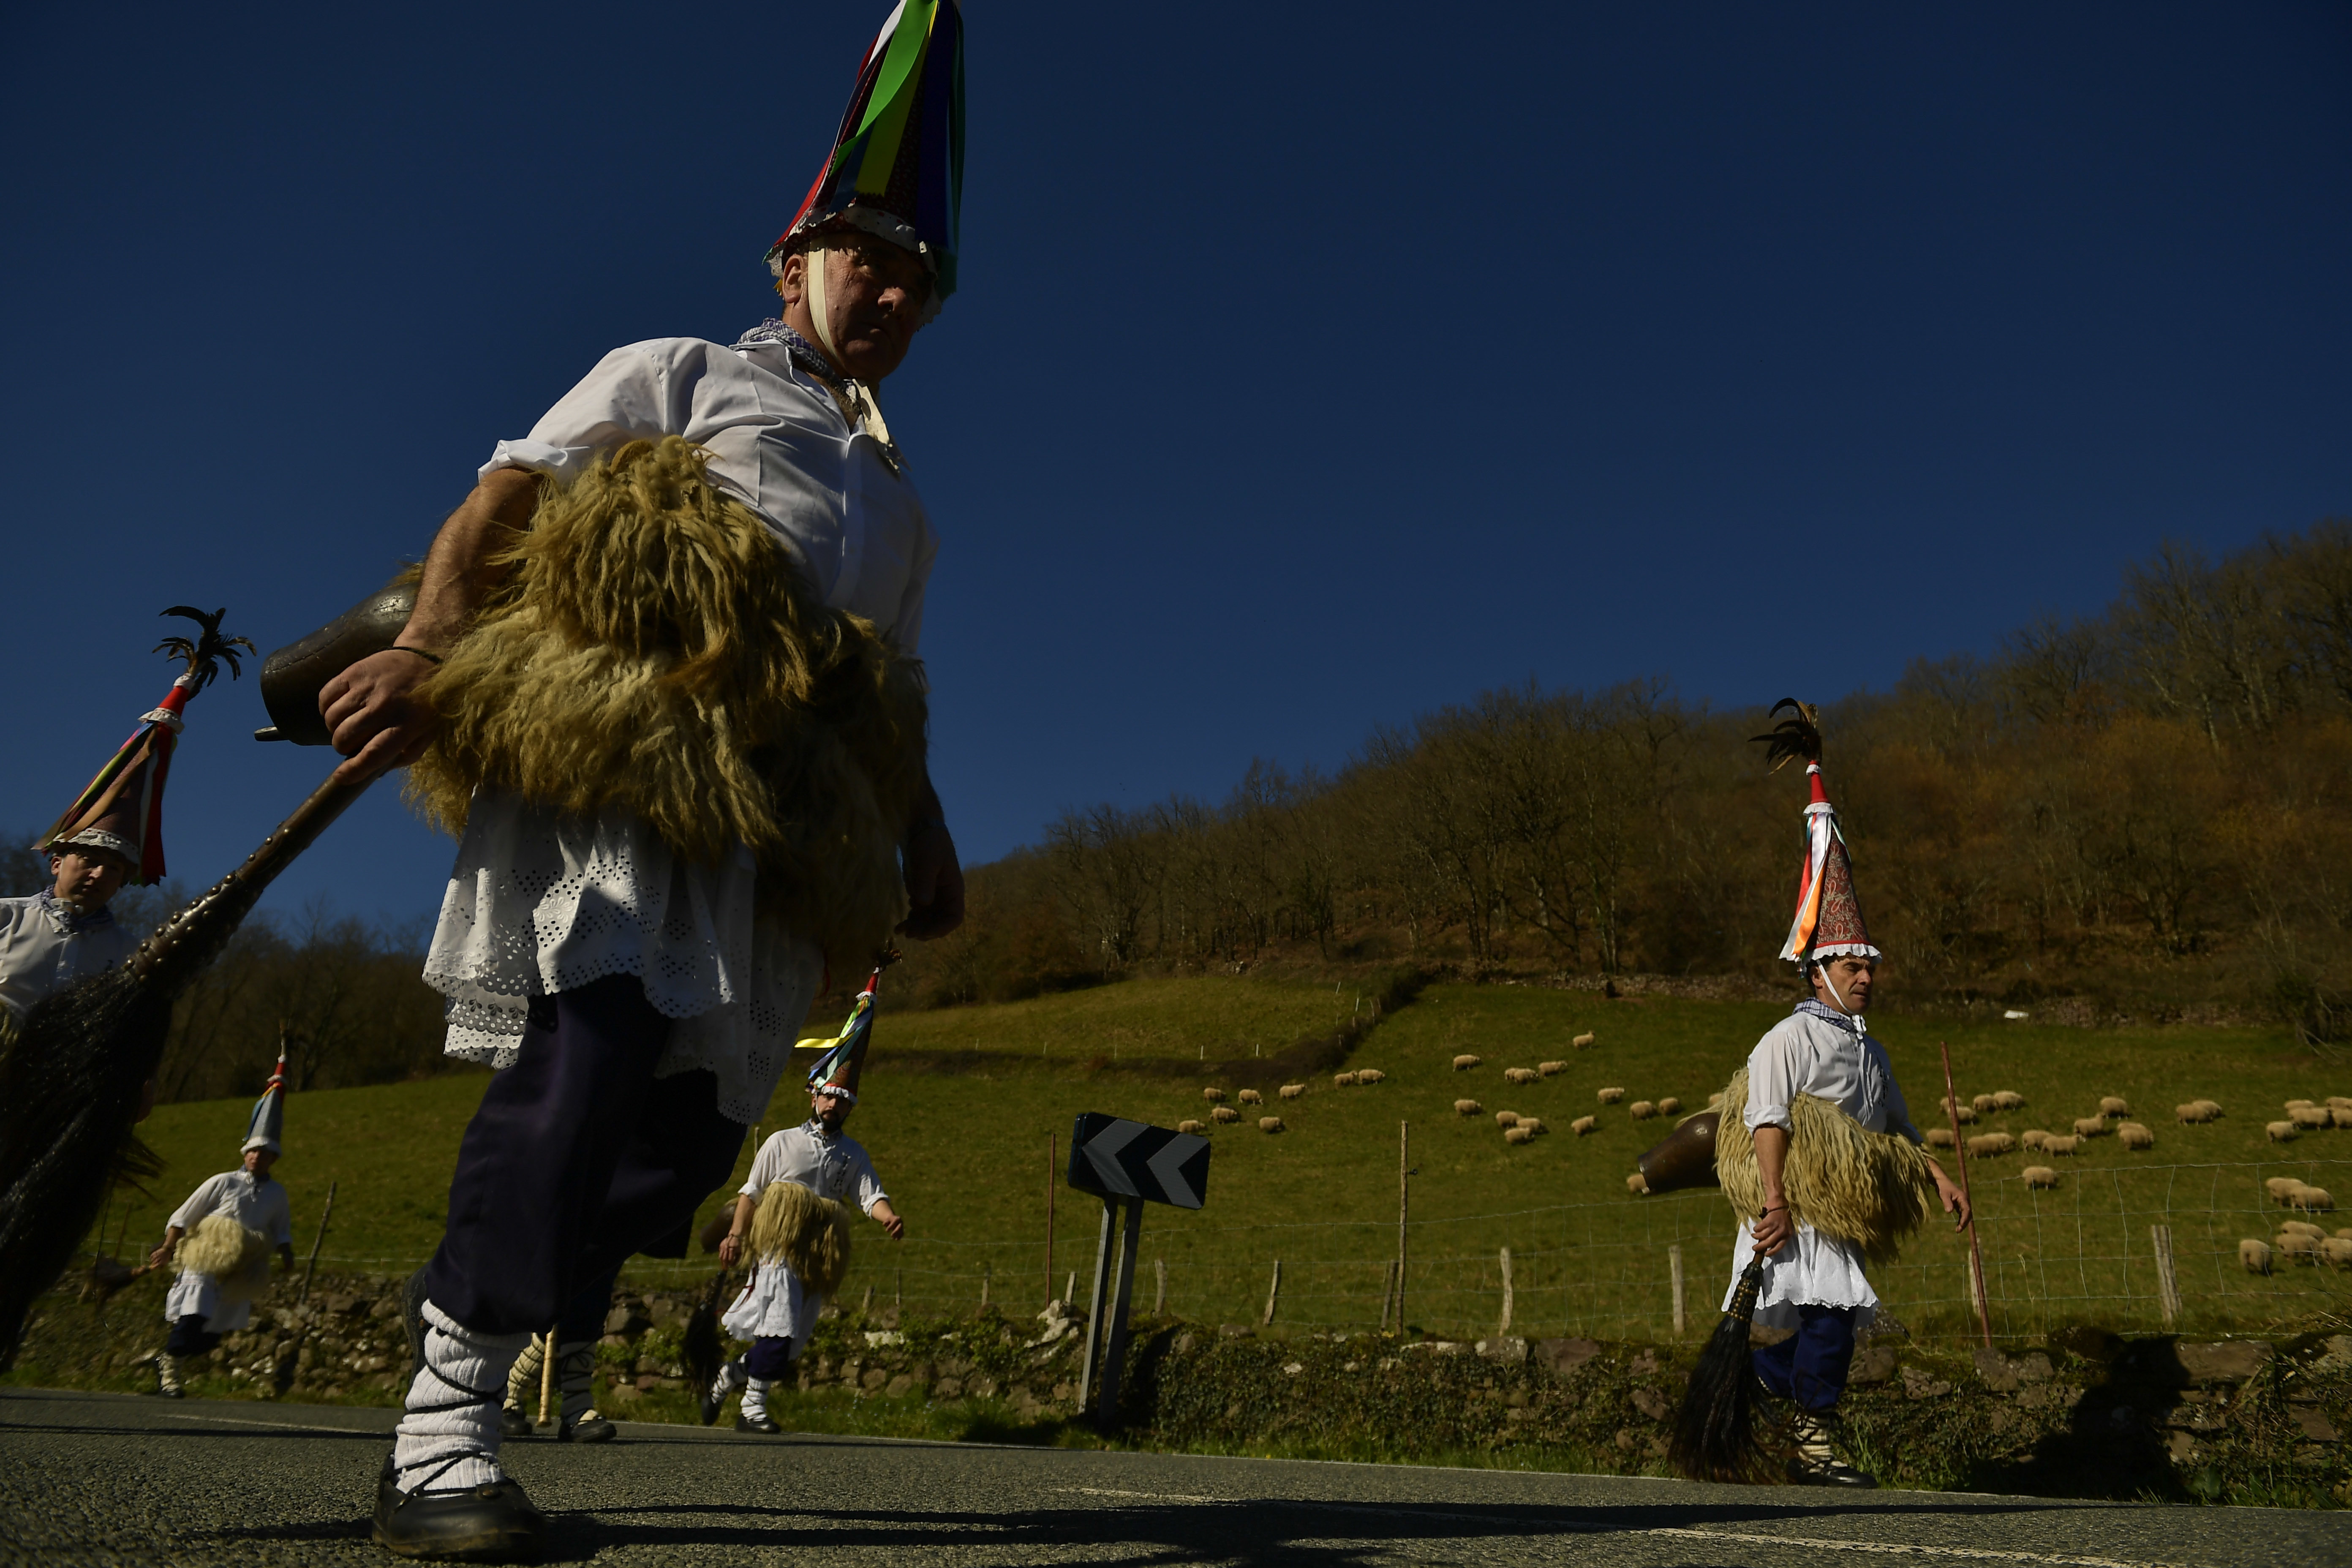 A group of Joaldunaks called Zanpantzar, take part in the Carnival between the Pyrenees villages of Ituren and Zubieta, northern Spain, Monday, Jan. 29, 2018. In one of the most ancient carnivals in Europe, dating from before the Roman empire, companies of Joaldunak (cowbells) made up of residents of two towns, Ituren and Zubieta, parade the streets costumed in sandals, lace petticoats, sheepskins around the waist and shoulders, coloured neckerchiefs, conical caps with ribbons and a hyssop of horsehair in their right hands and cowbells hung across their lower back. (AP Photo/Alvaro Barrientos)